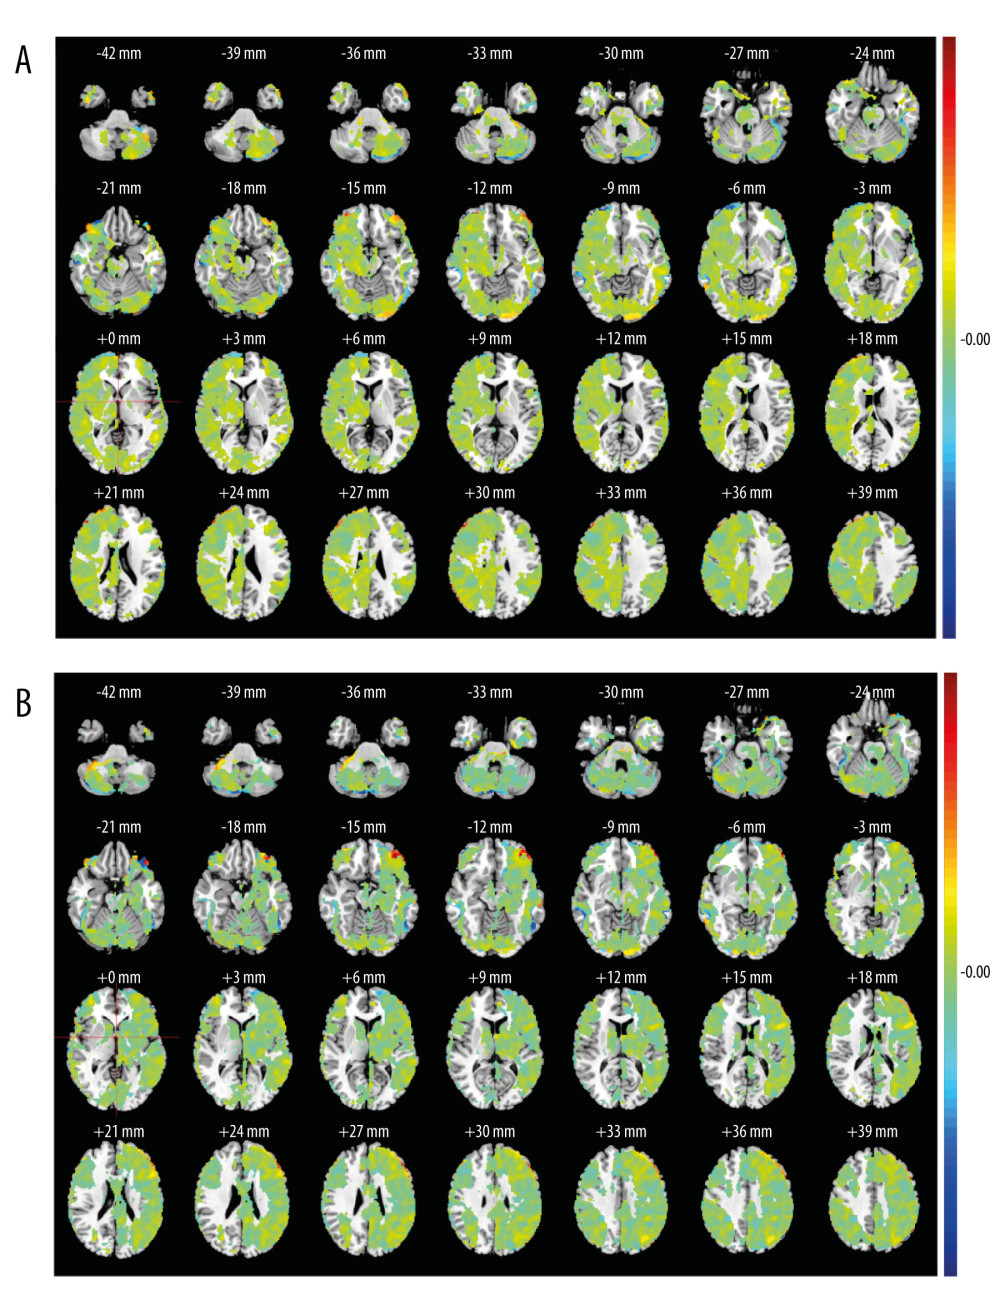 The selected resting-state frontoparietal network in this studyFPN included left FPN and right FPN. Left FPN (A) included the right inferior semilunar lobule, left fusiform gyrus, the orbital part of right inferior frontal gyrus, right parietal lobule, left supra-marginal gyrus, the left orbital middle frontal gyrus, right middle frontal gyrus, etc. Right FPN (B) included the left inferior semilunar lobule, right middle frontal gyrus, the orbital part of left inferior frontal gyrus, right parahippocampal gyrus, right supraoccipital gyrus, right superior marginal gyrus, etc. MATLAB R2017a (MathWorks, Inc., USA) was used to create this figure.